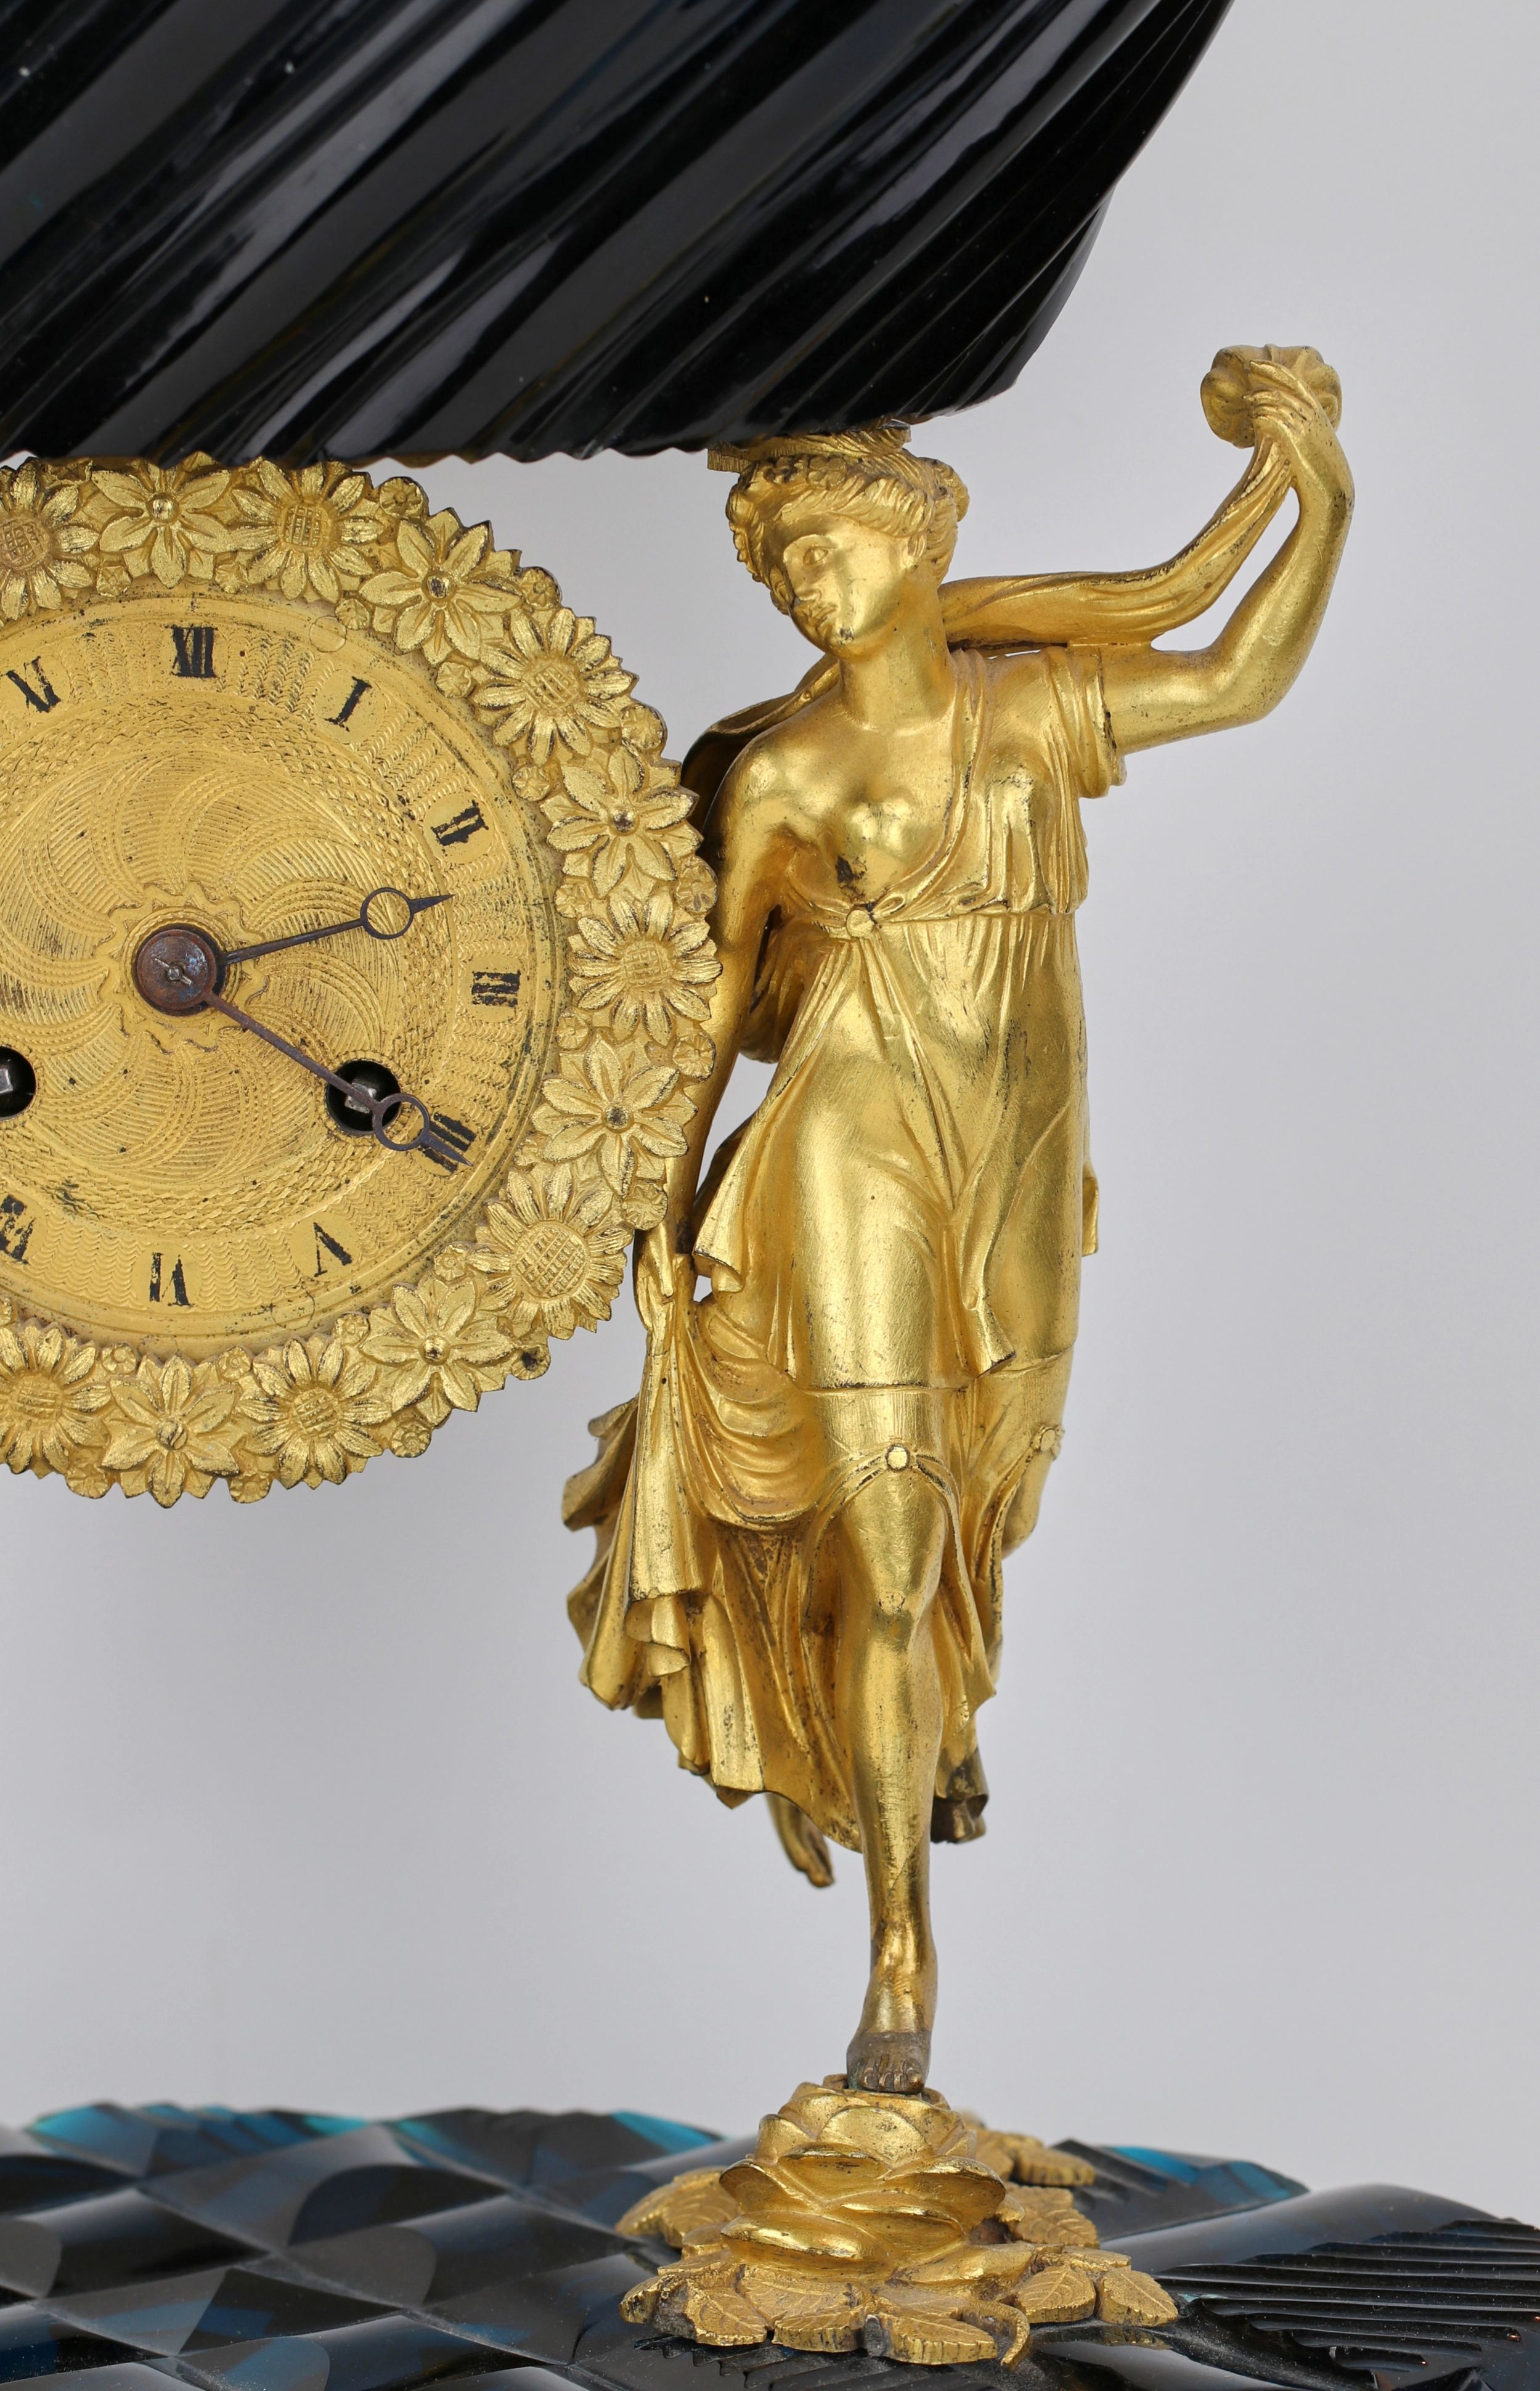 Unique mantel clock, made of glass and bronze. Royal Russia. Early 19th century. - Image 4 of 5